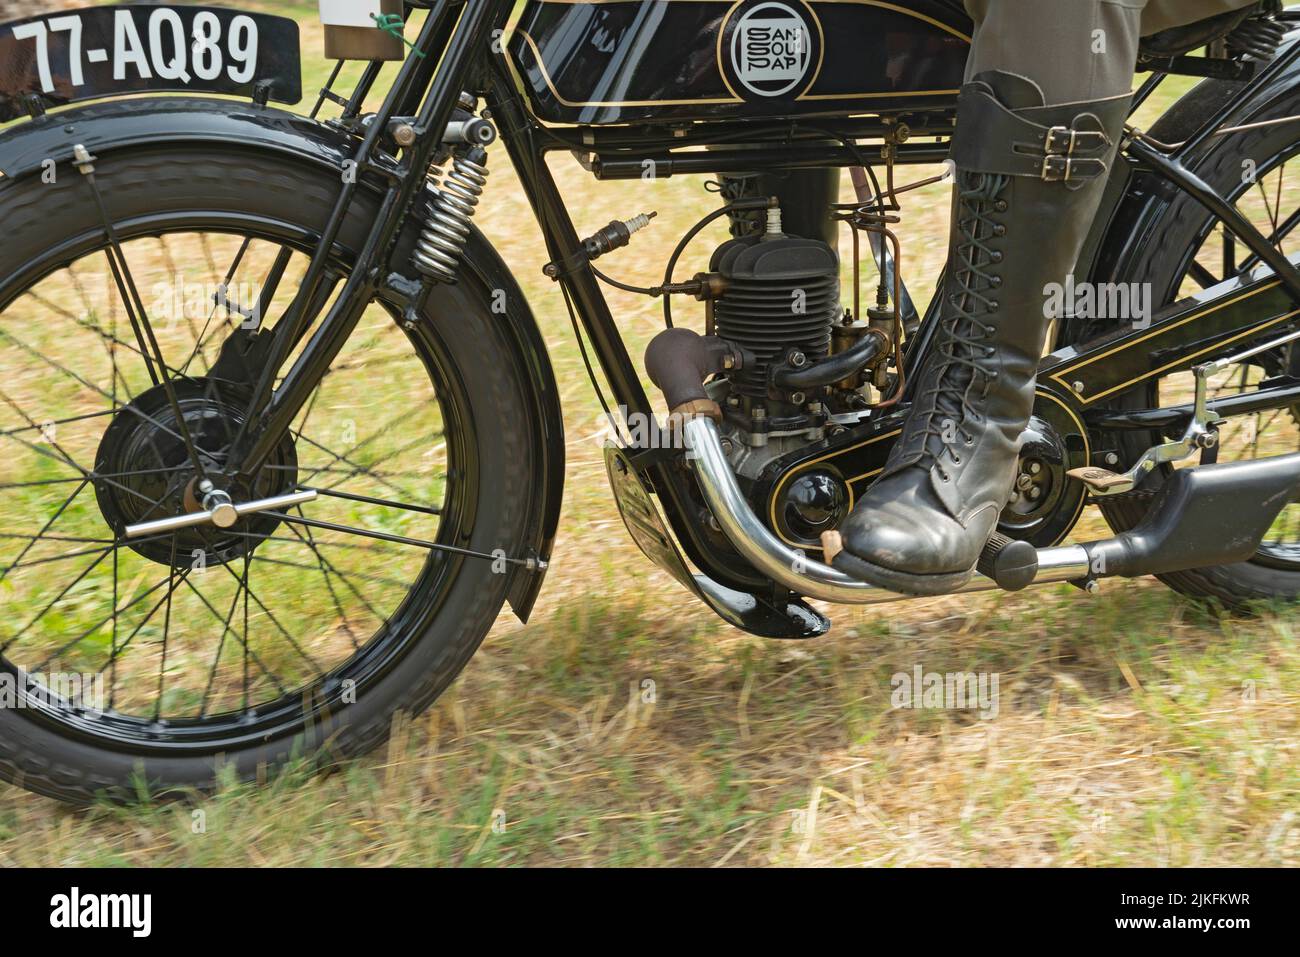 05 June 2022 - Italy, Lombardy, Cremona, Sottocanna in Circuito, Meeting of Old Motorbike Stock Photo